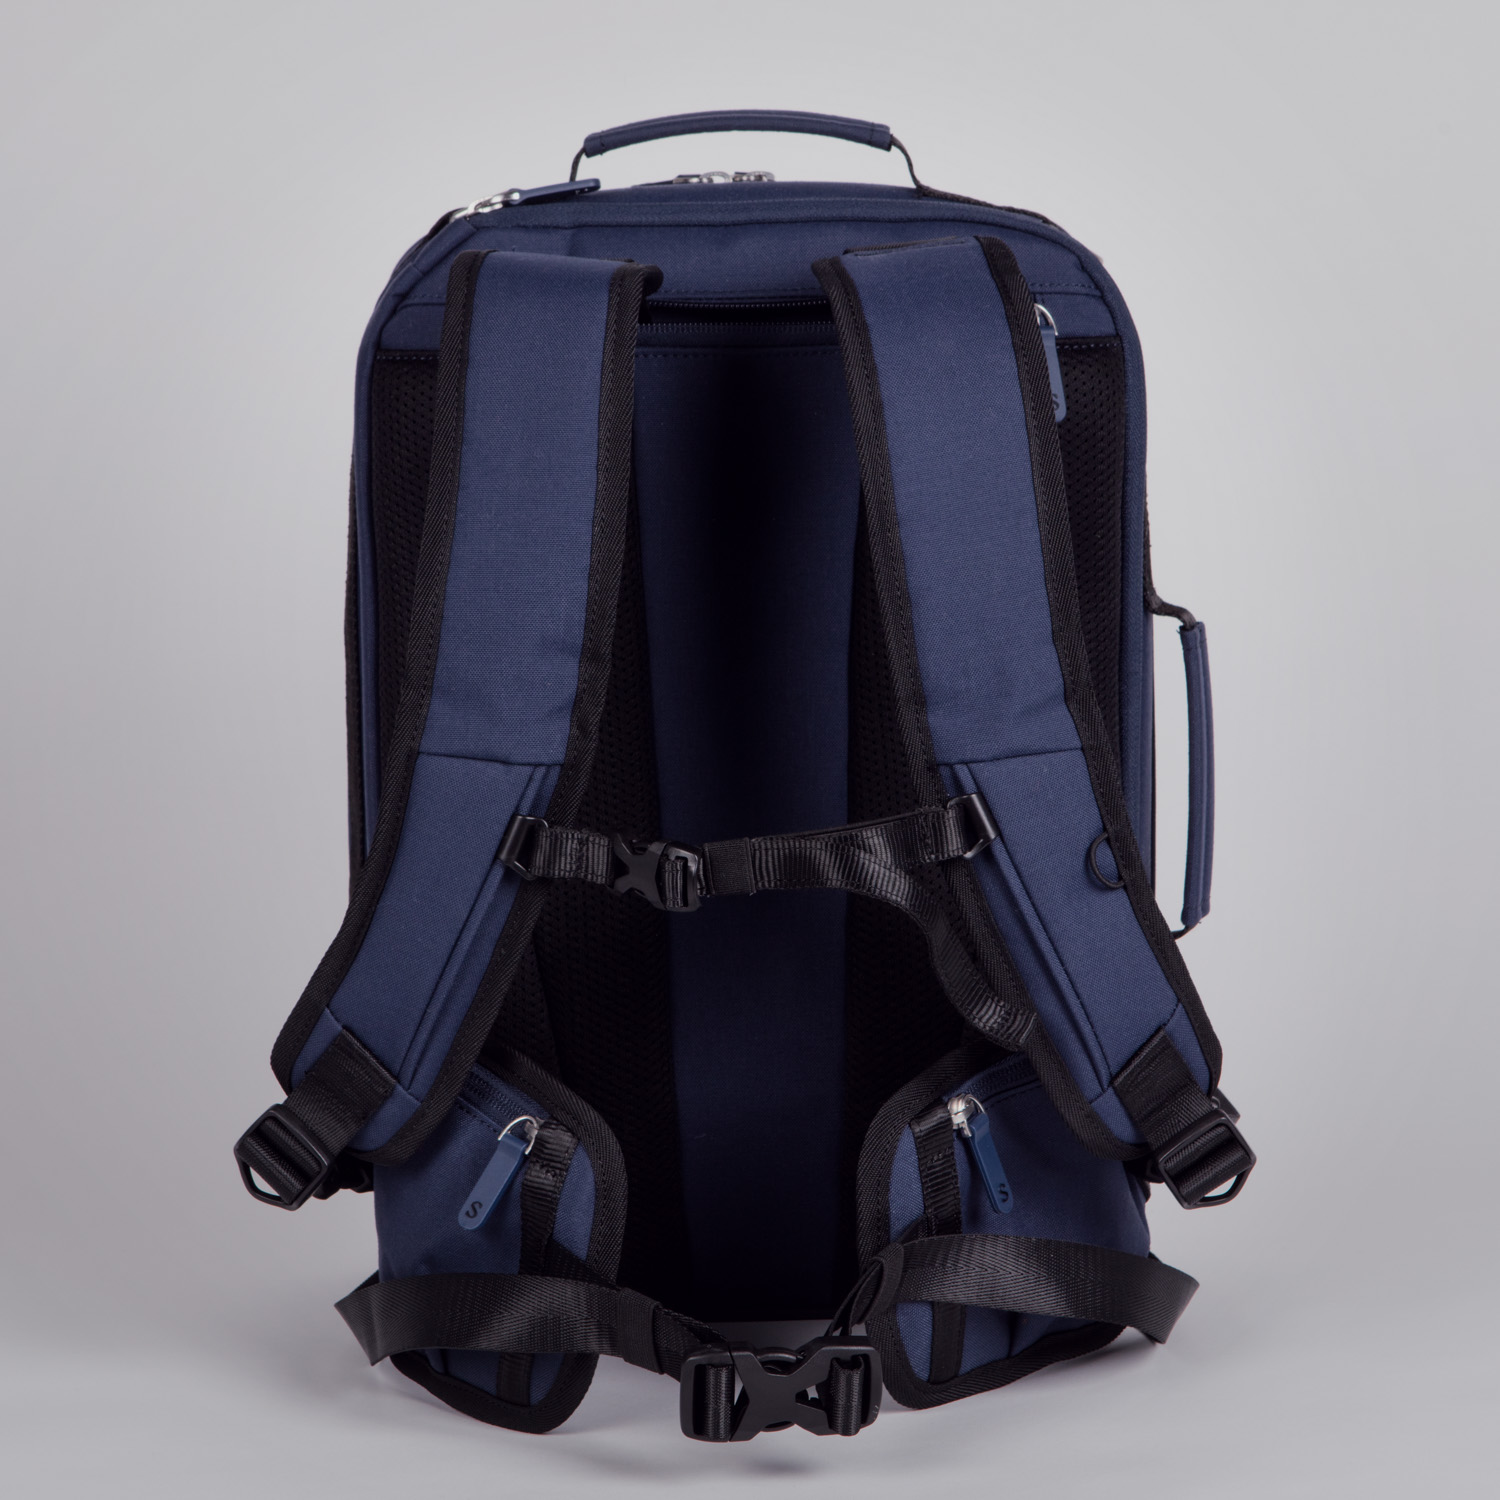 Small commuter backpack from Stolt